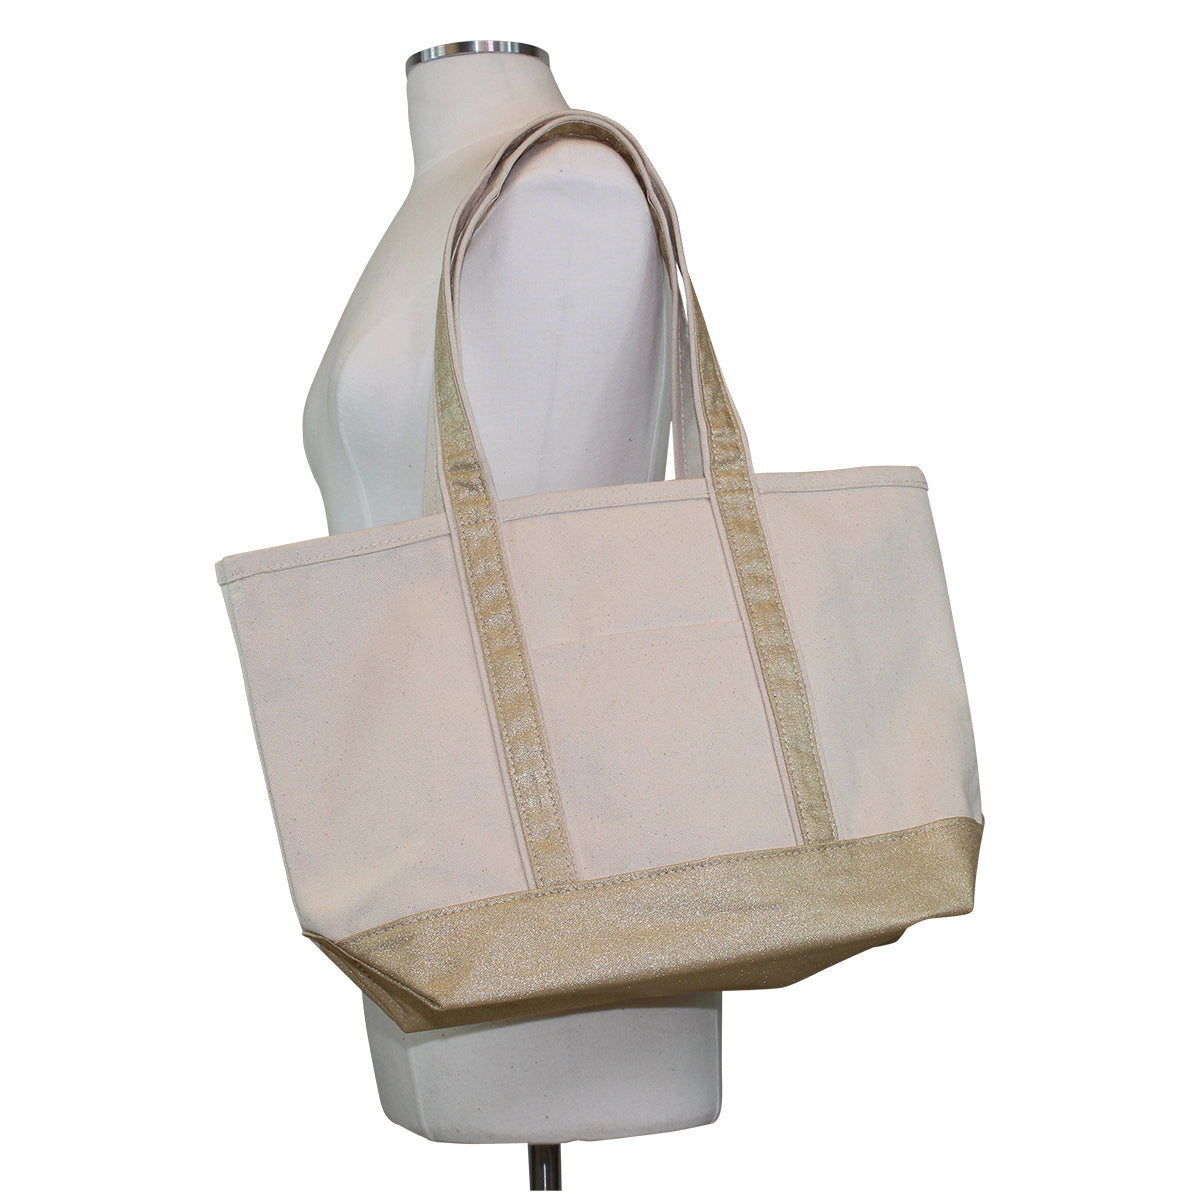 Personalized Metallic Trimmed Tote Bag